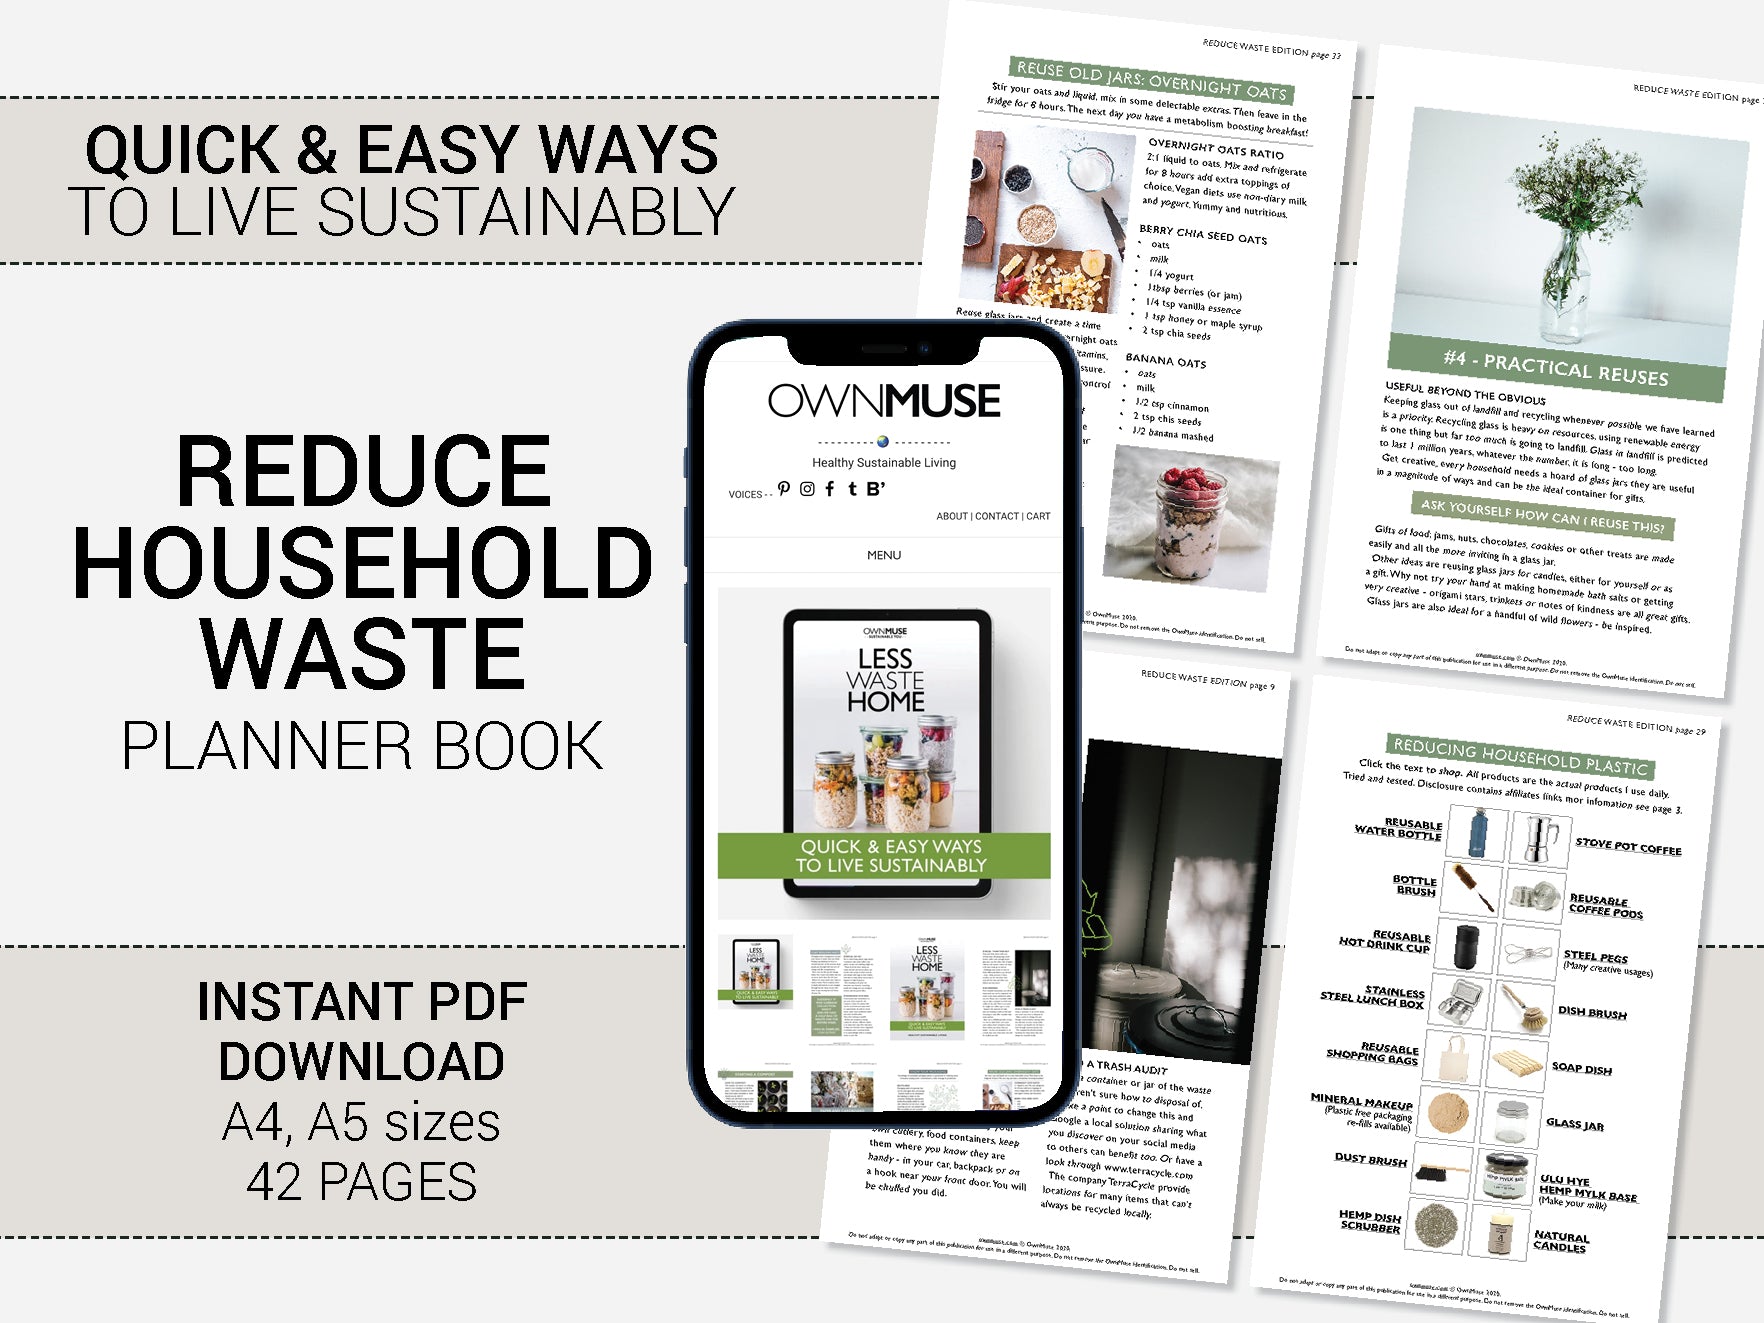 Step-by-step Sustainable Living Guide: Less Waste Home